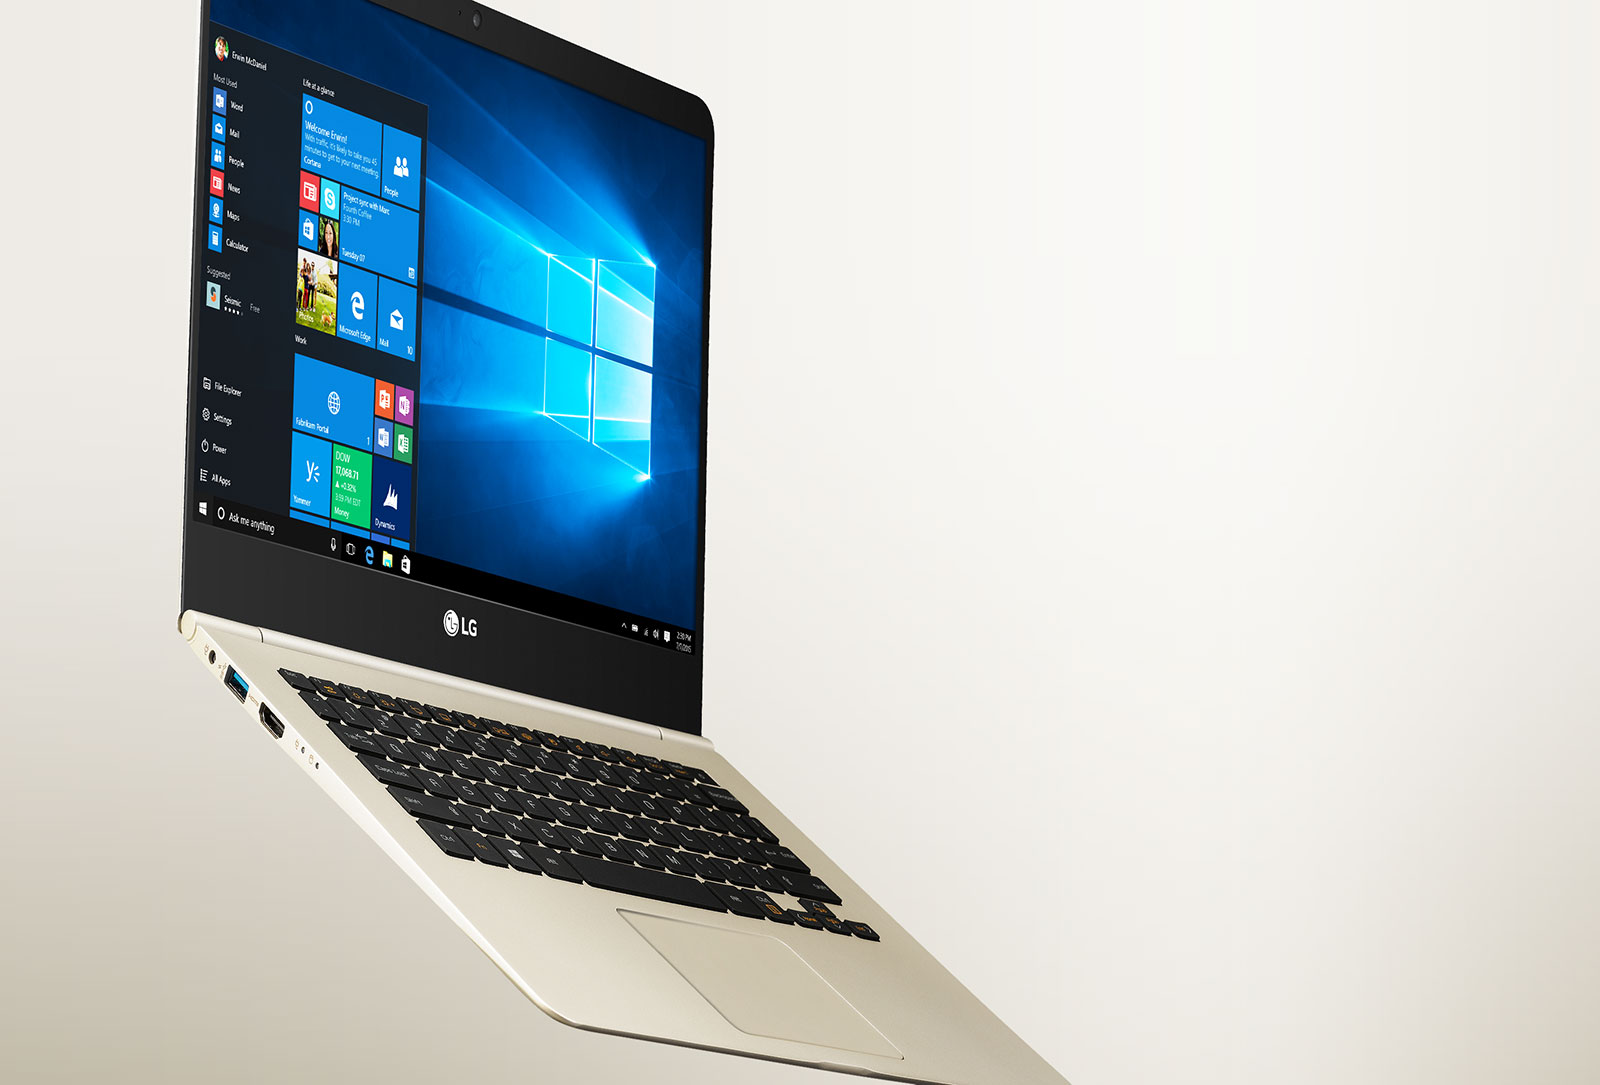 LG has an updated Gram laptop lineup that claims battery life up to an unbelievable 24 hours